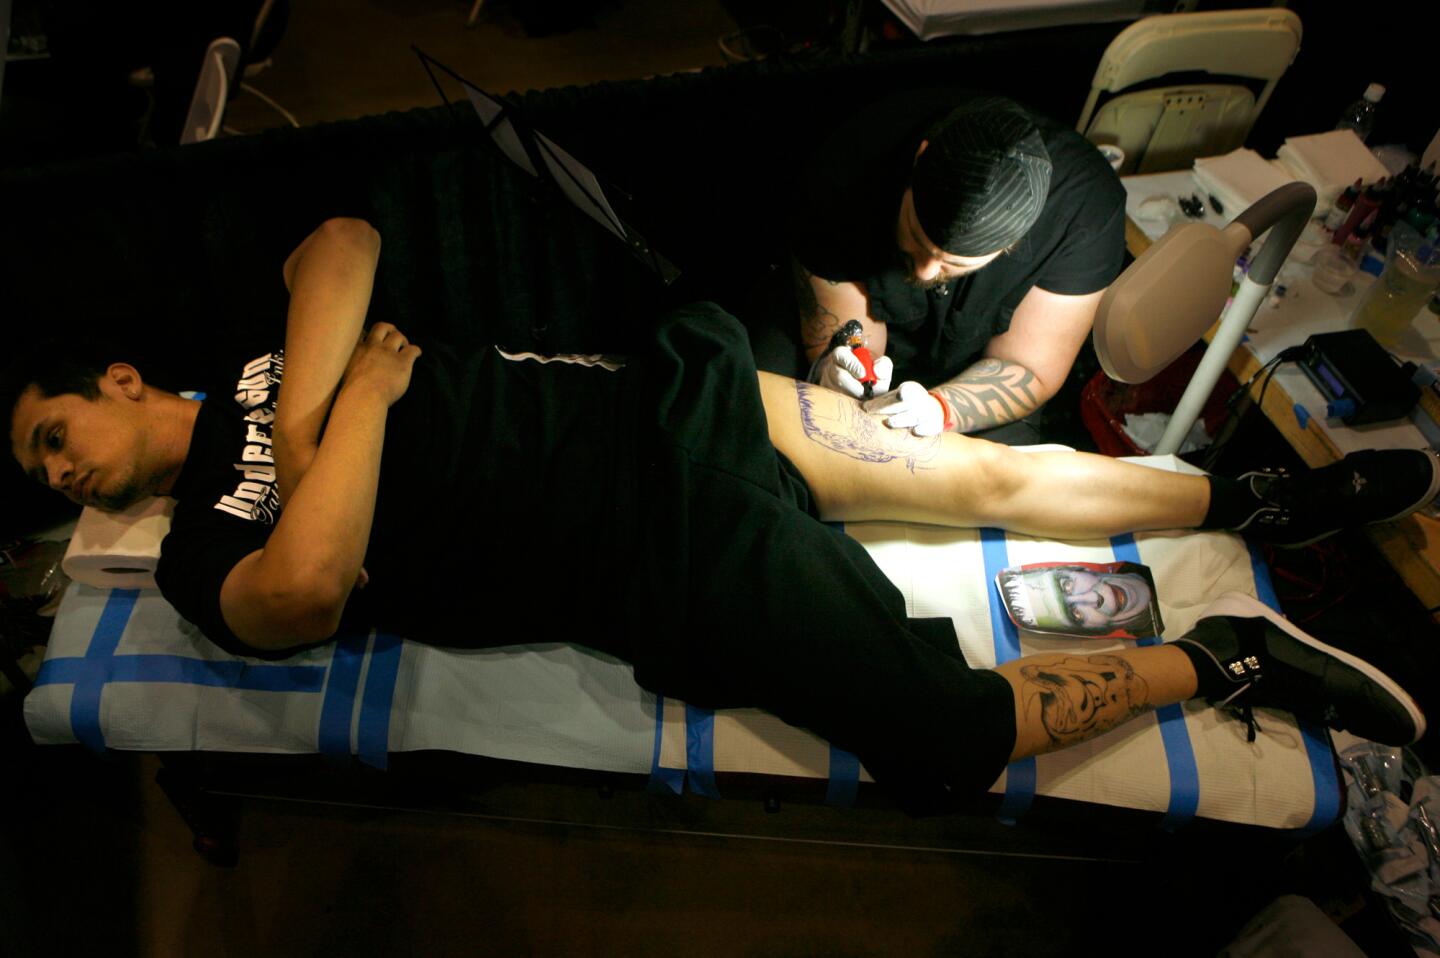 Live tattooing